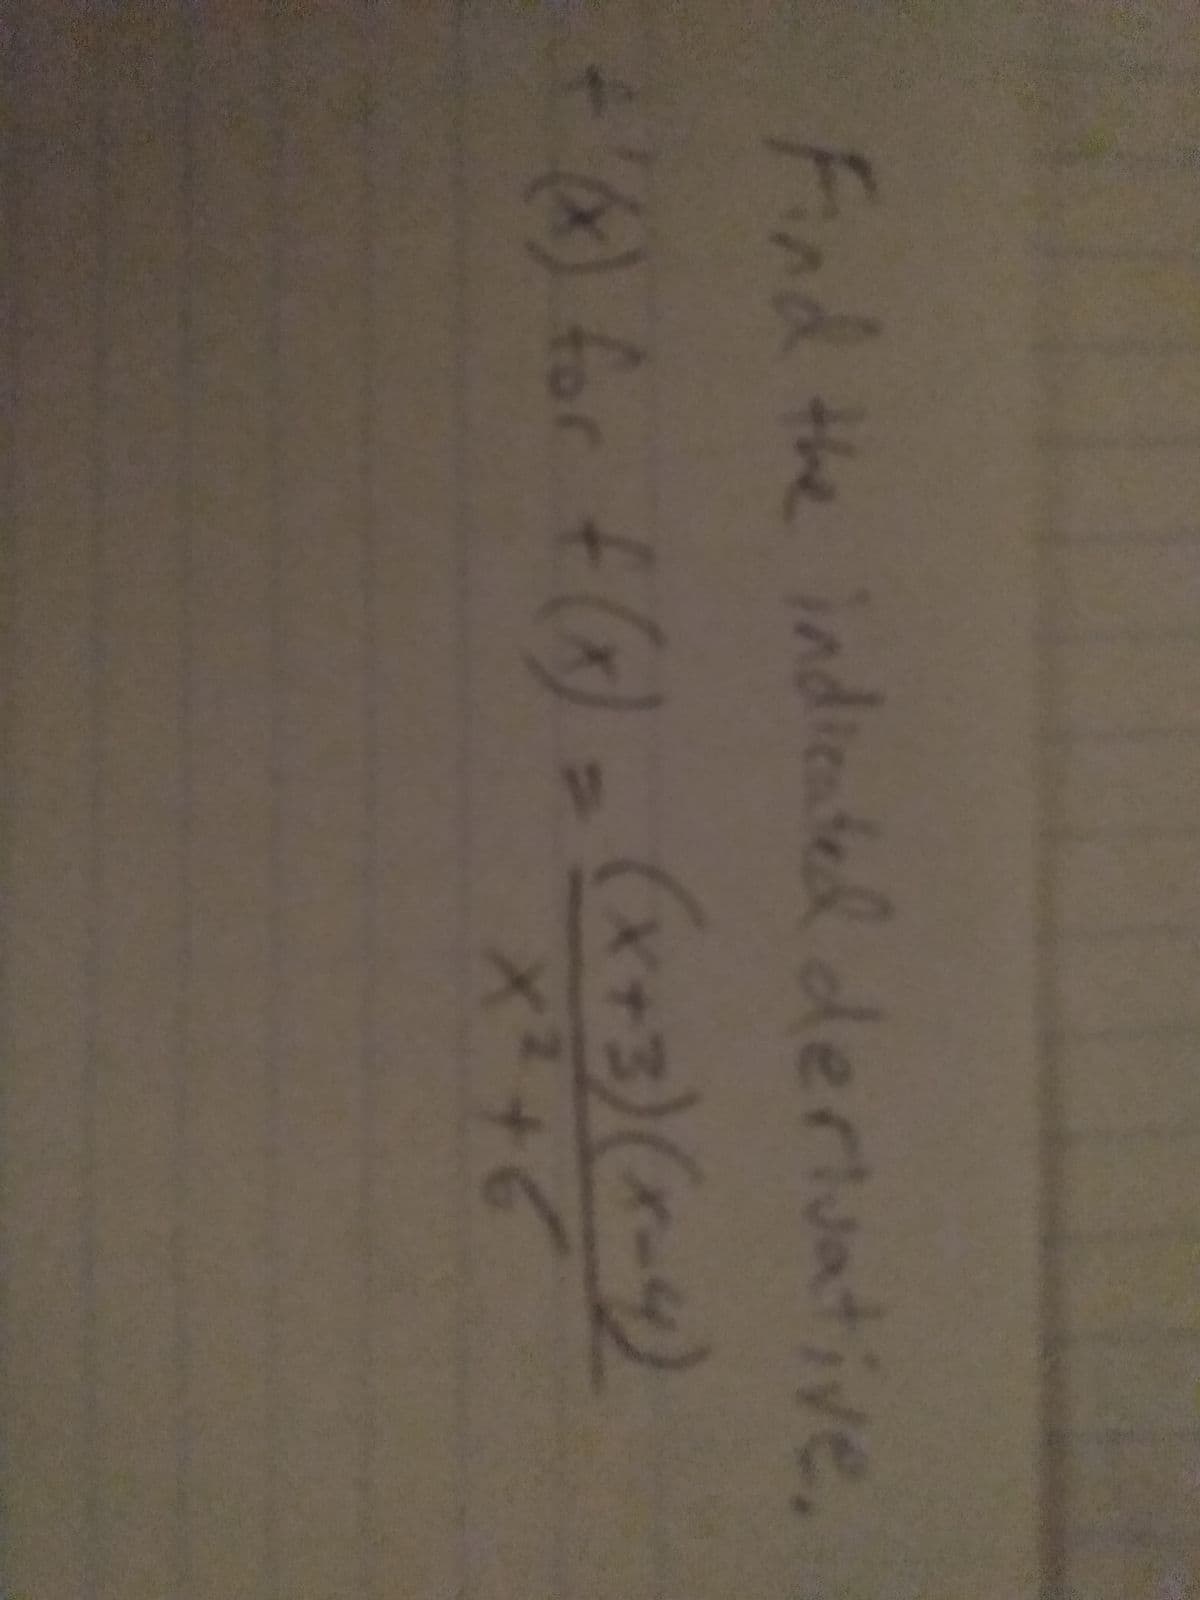 Fnd the indientel deriuative
+) for f()= (x+3)(-4)
X²+6
2.
